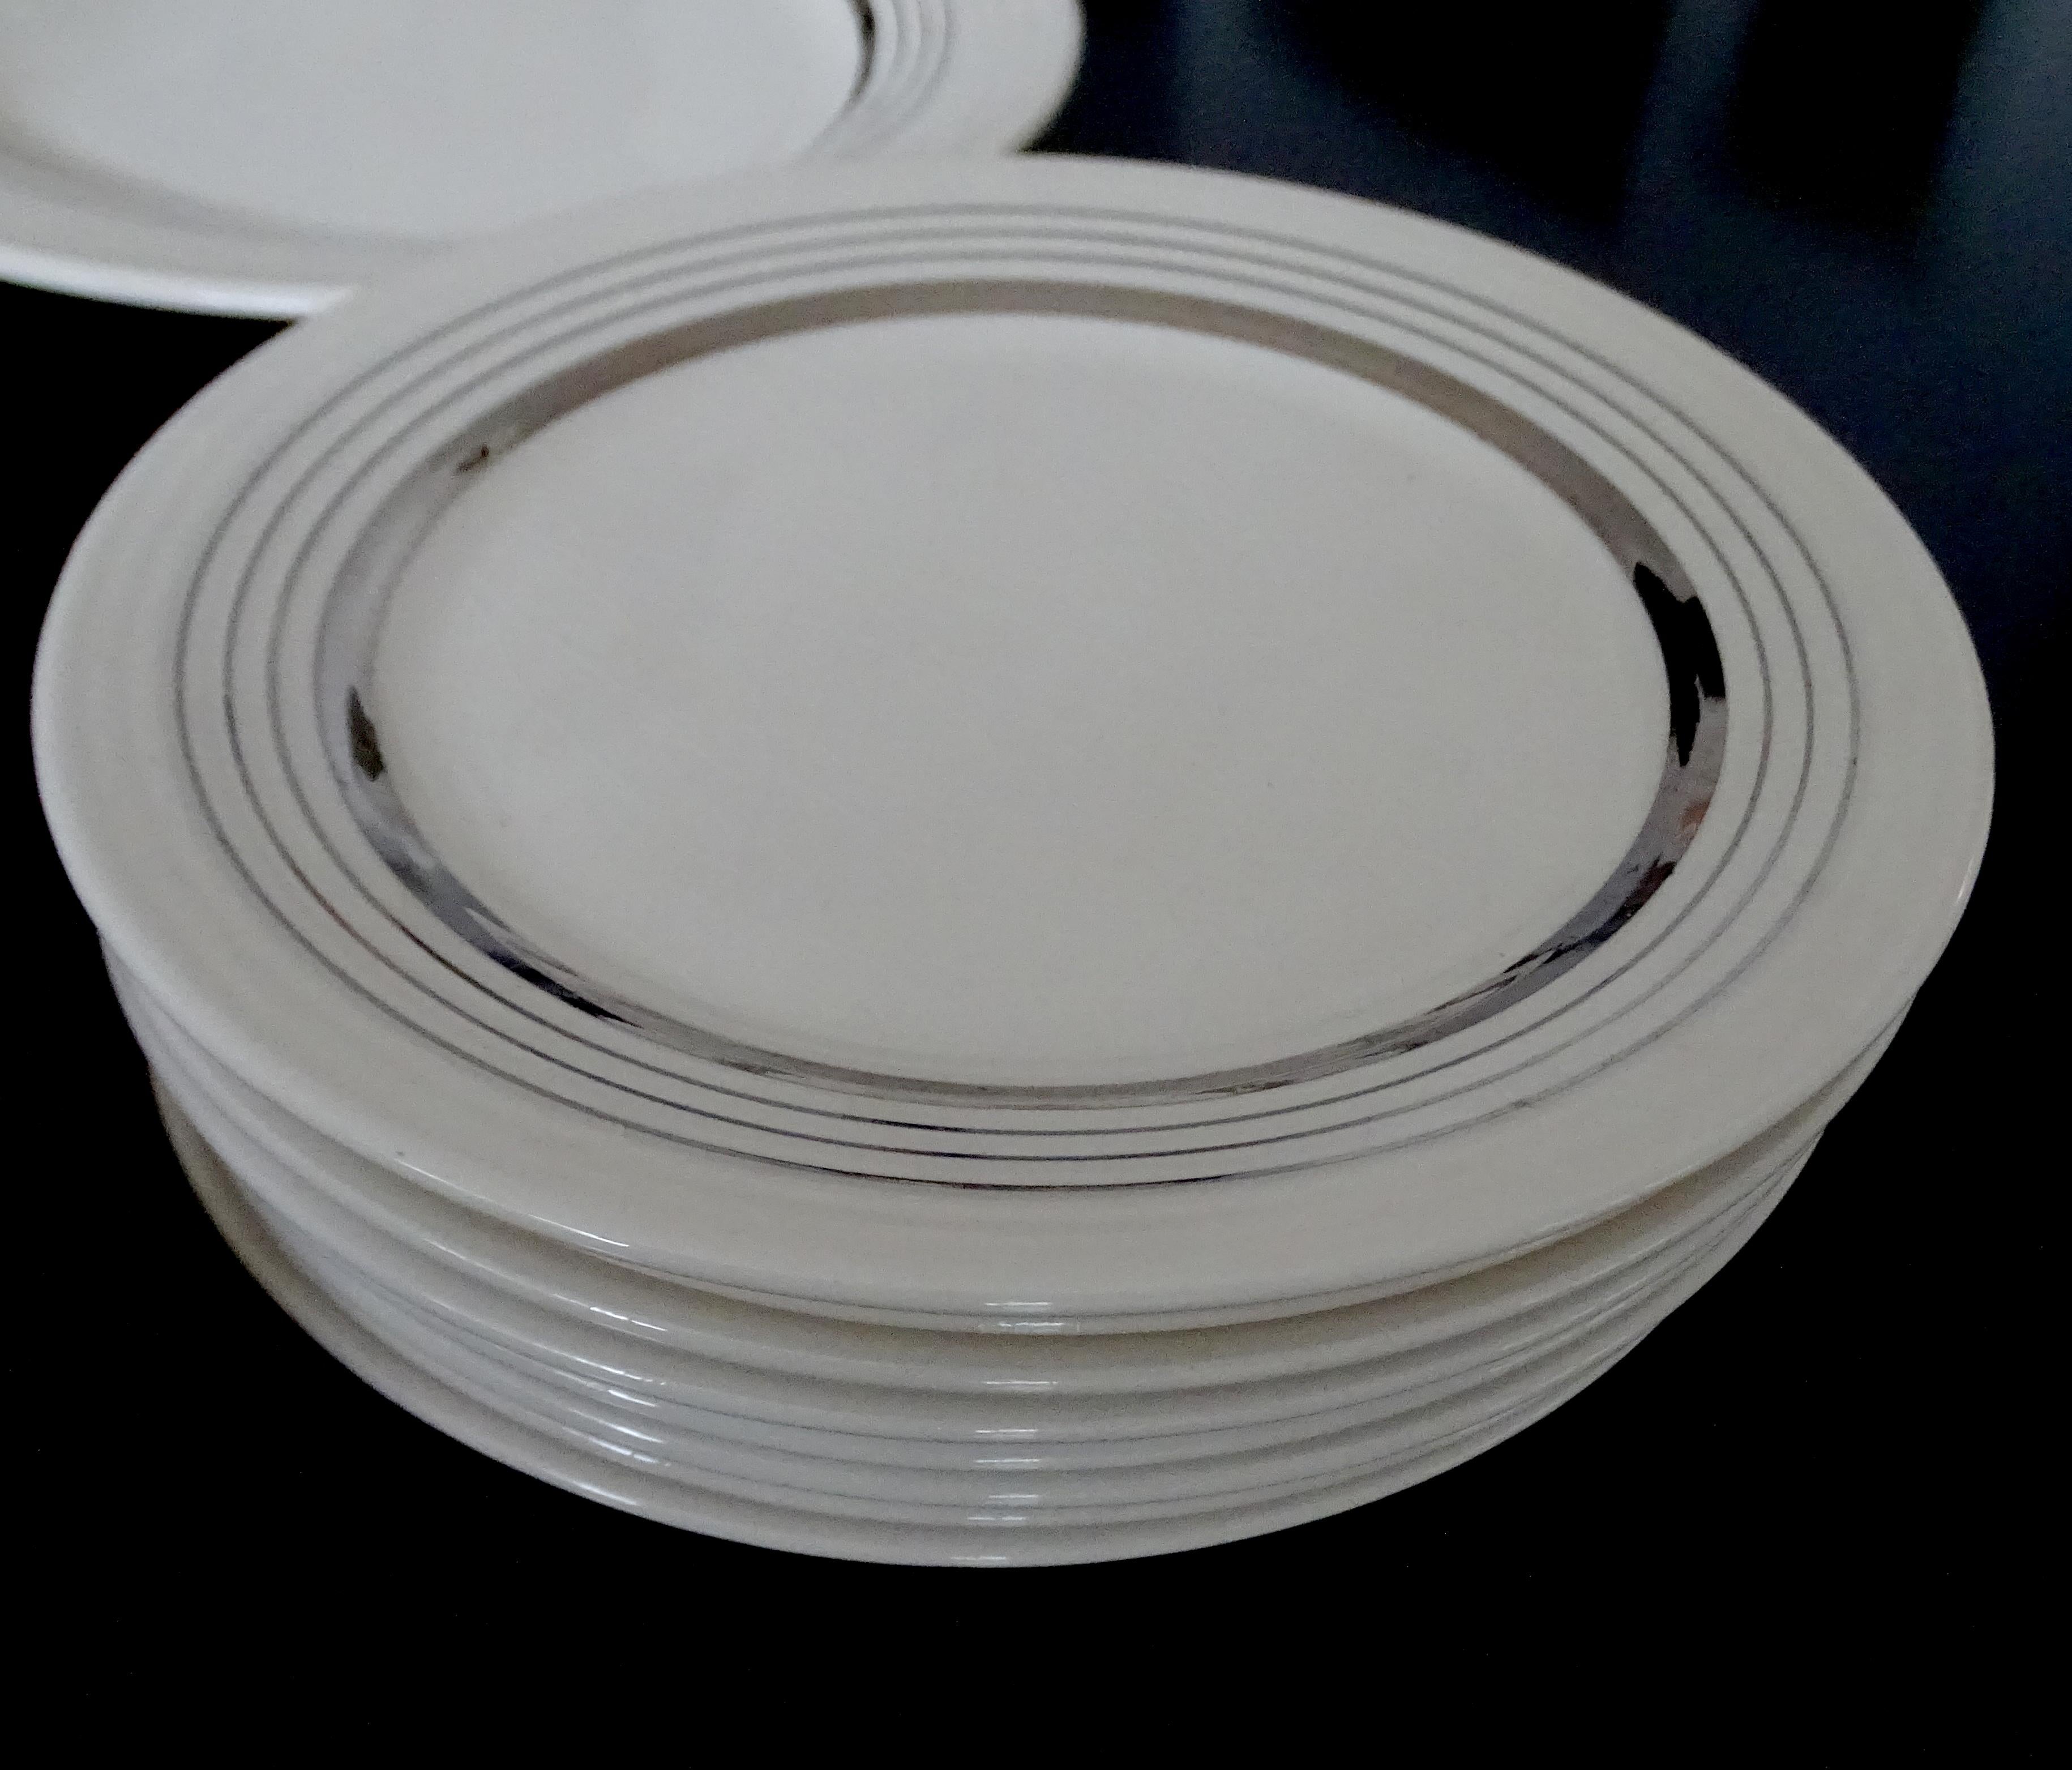 Porcelain Art Deco American Limoges White Gold China Dinnerware Service Set, 1930s For Sale